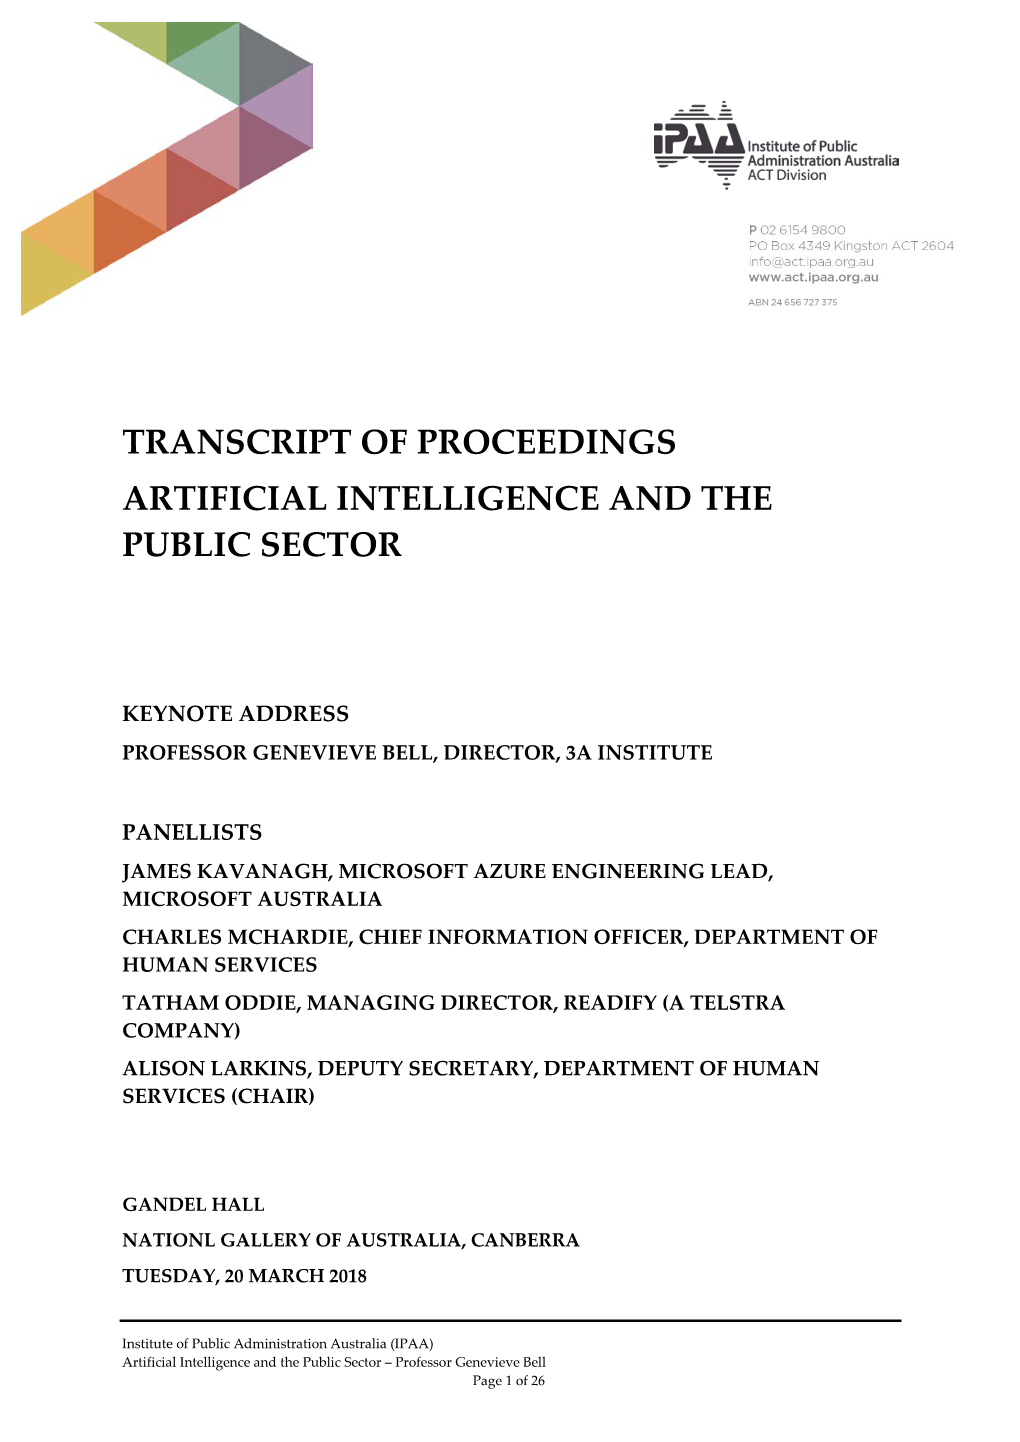 Transcript of Proceedings Artificial Intelligence and the Public Sector